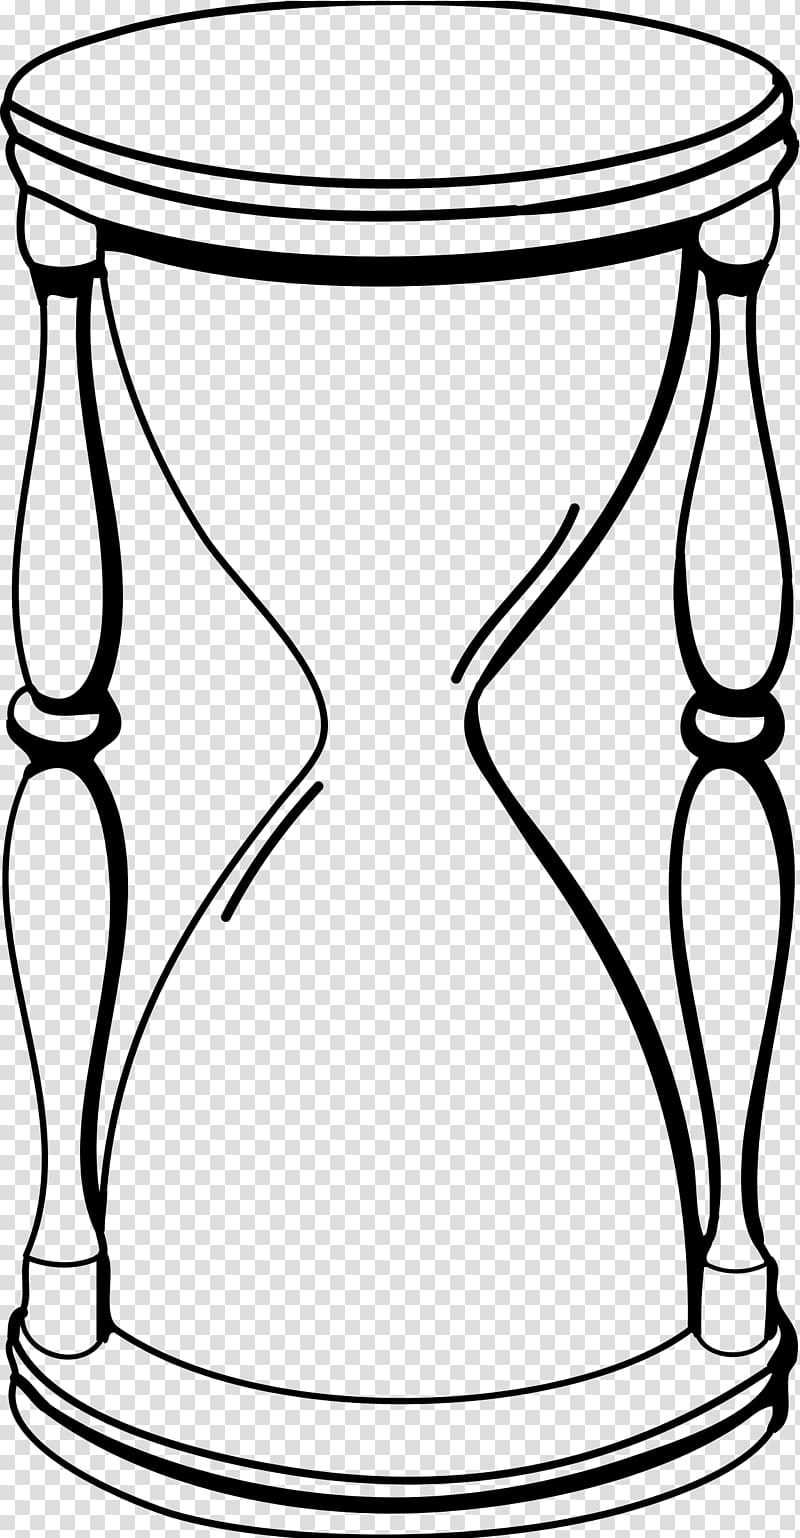 One continuous line drawing of old classic hourglass or sand clock to tell  the time. Timepiece concept. Clock sketch minimalism design. Single line  draw design vector illustration:: موقع تصميمي